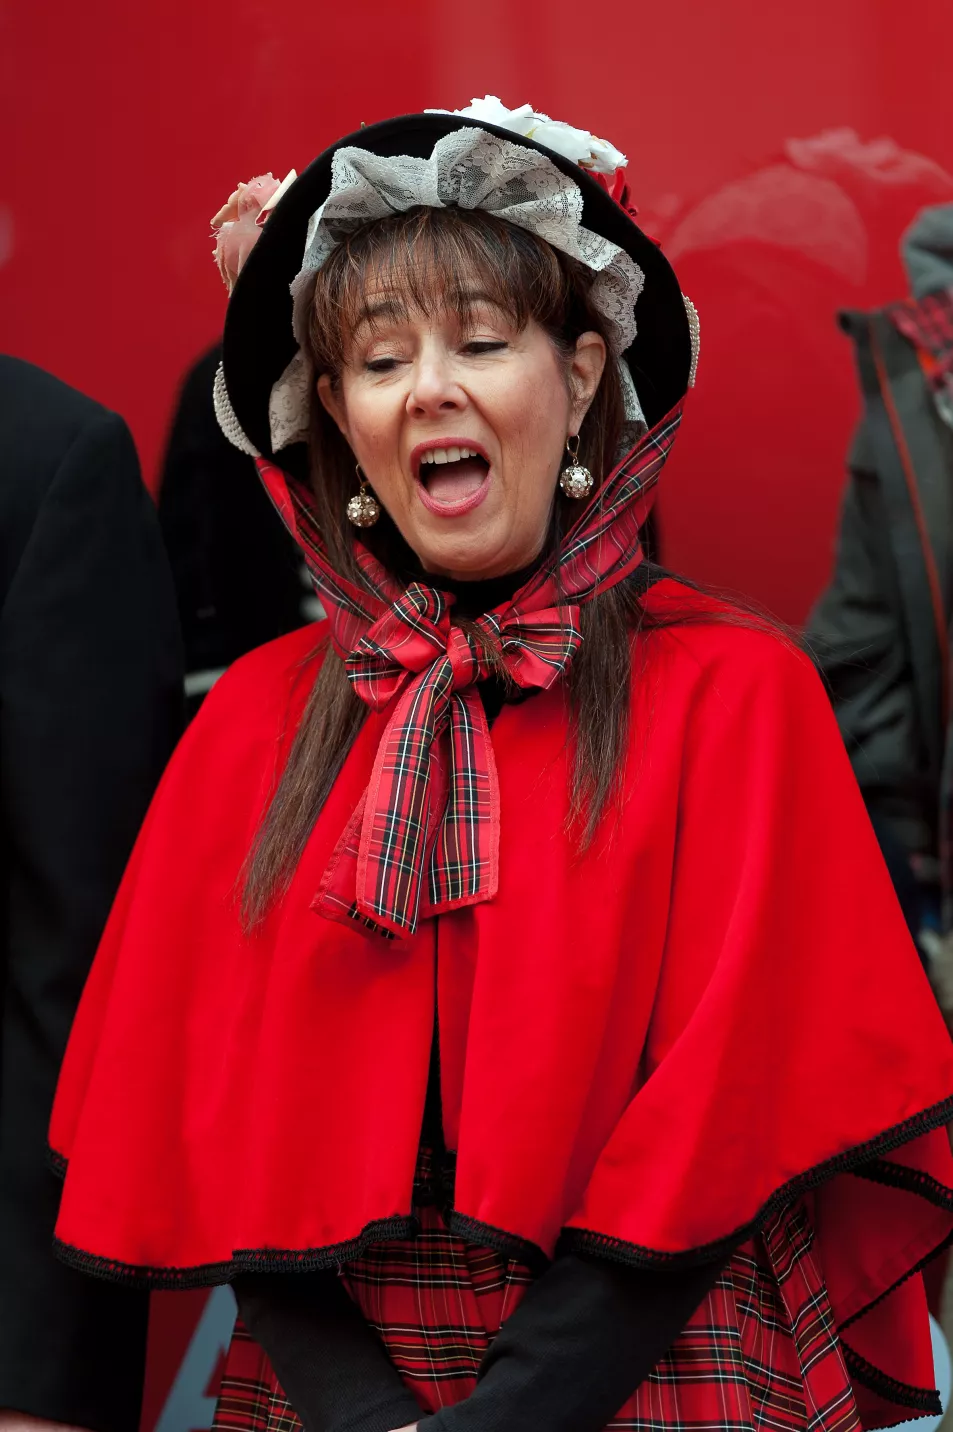 Woman wearing red Victorian caroler outfit singing